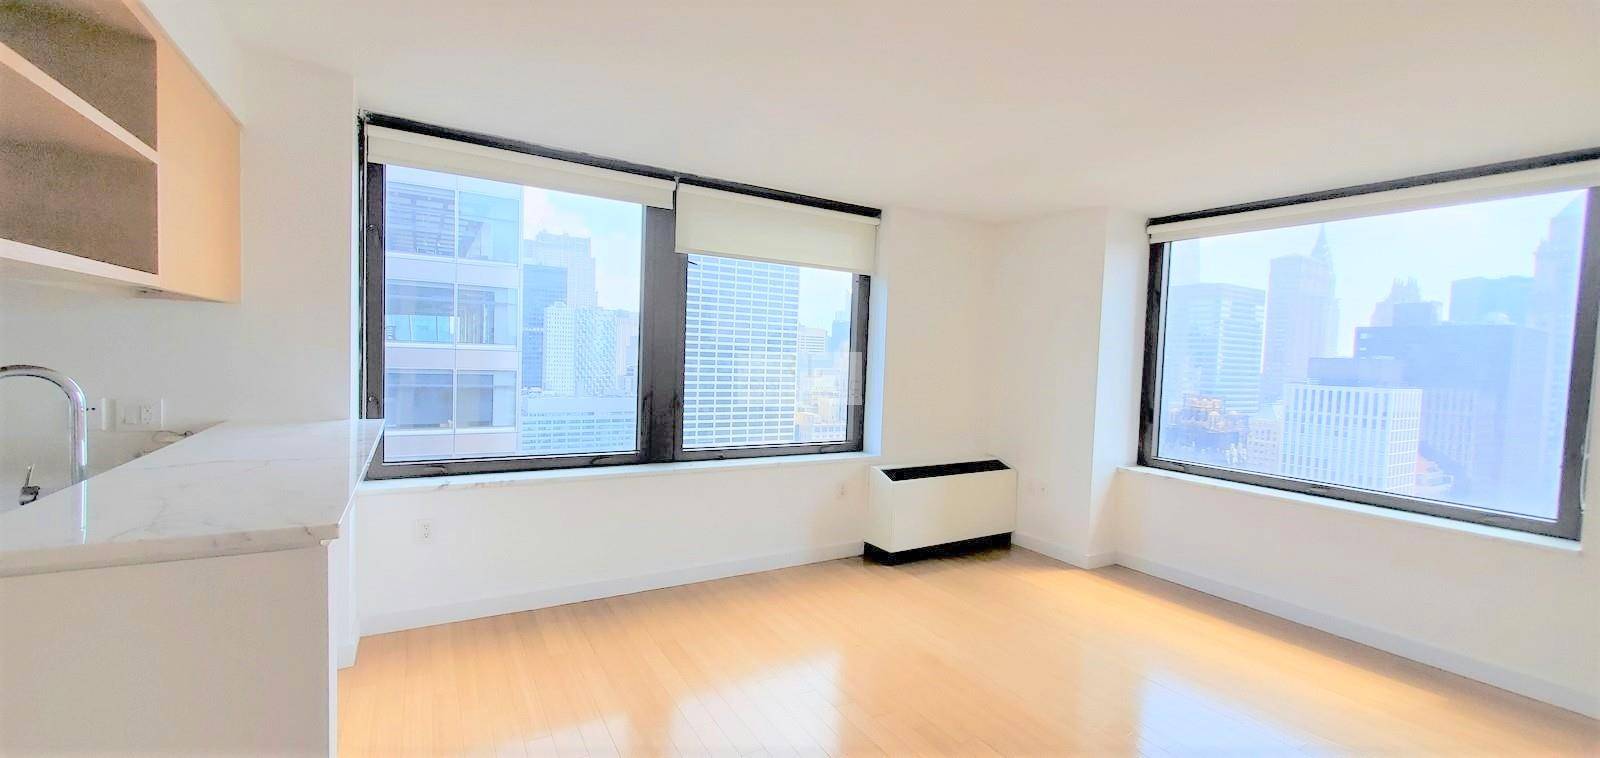 If you are looking for a sunny alcove studio on a high floor with city views and close to Bryant Park you should seriously consider apt 41D at 100 West ...